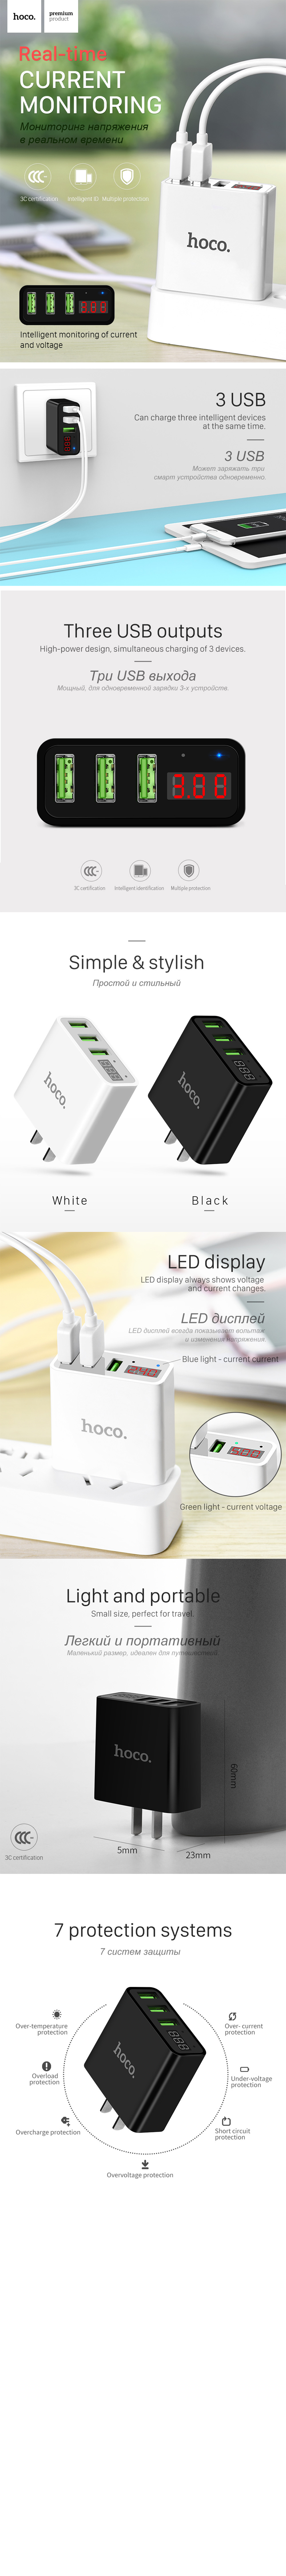 Hoco C15 3 USB Charging Adapter with LED Display